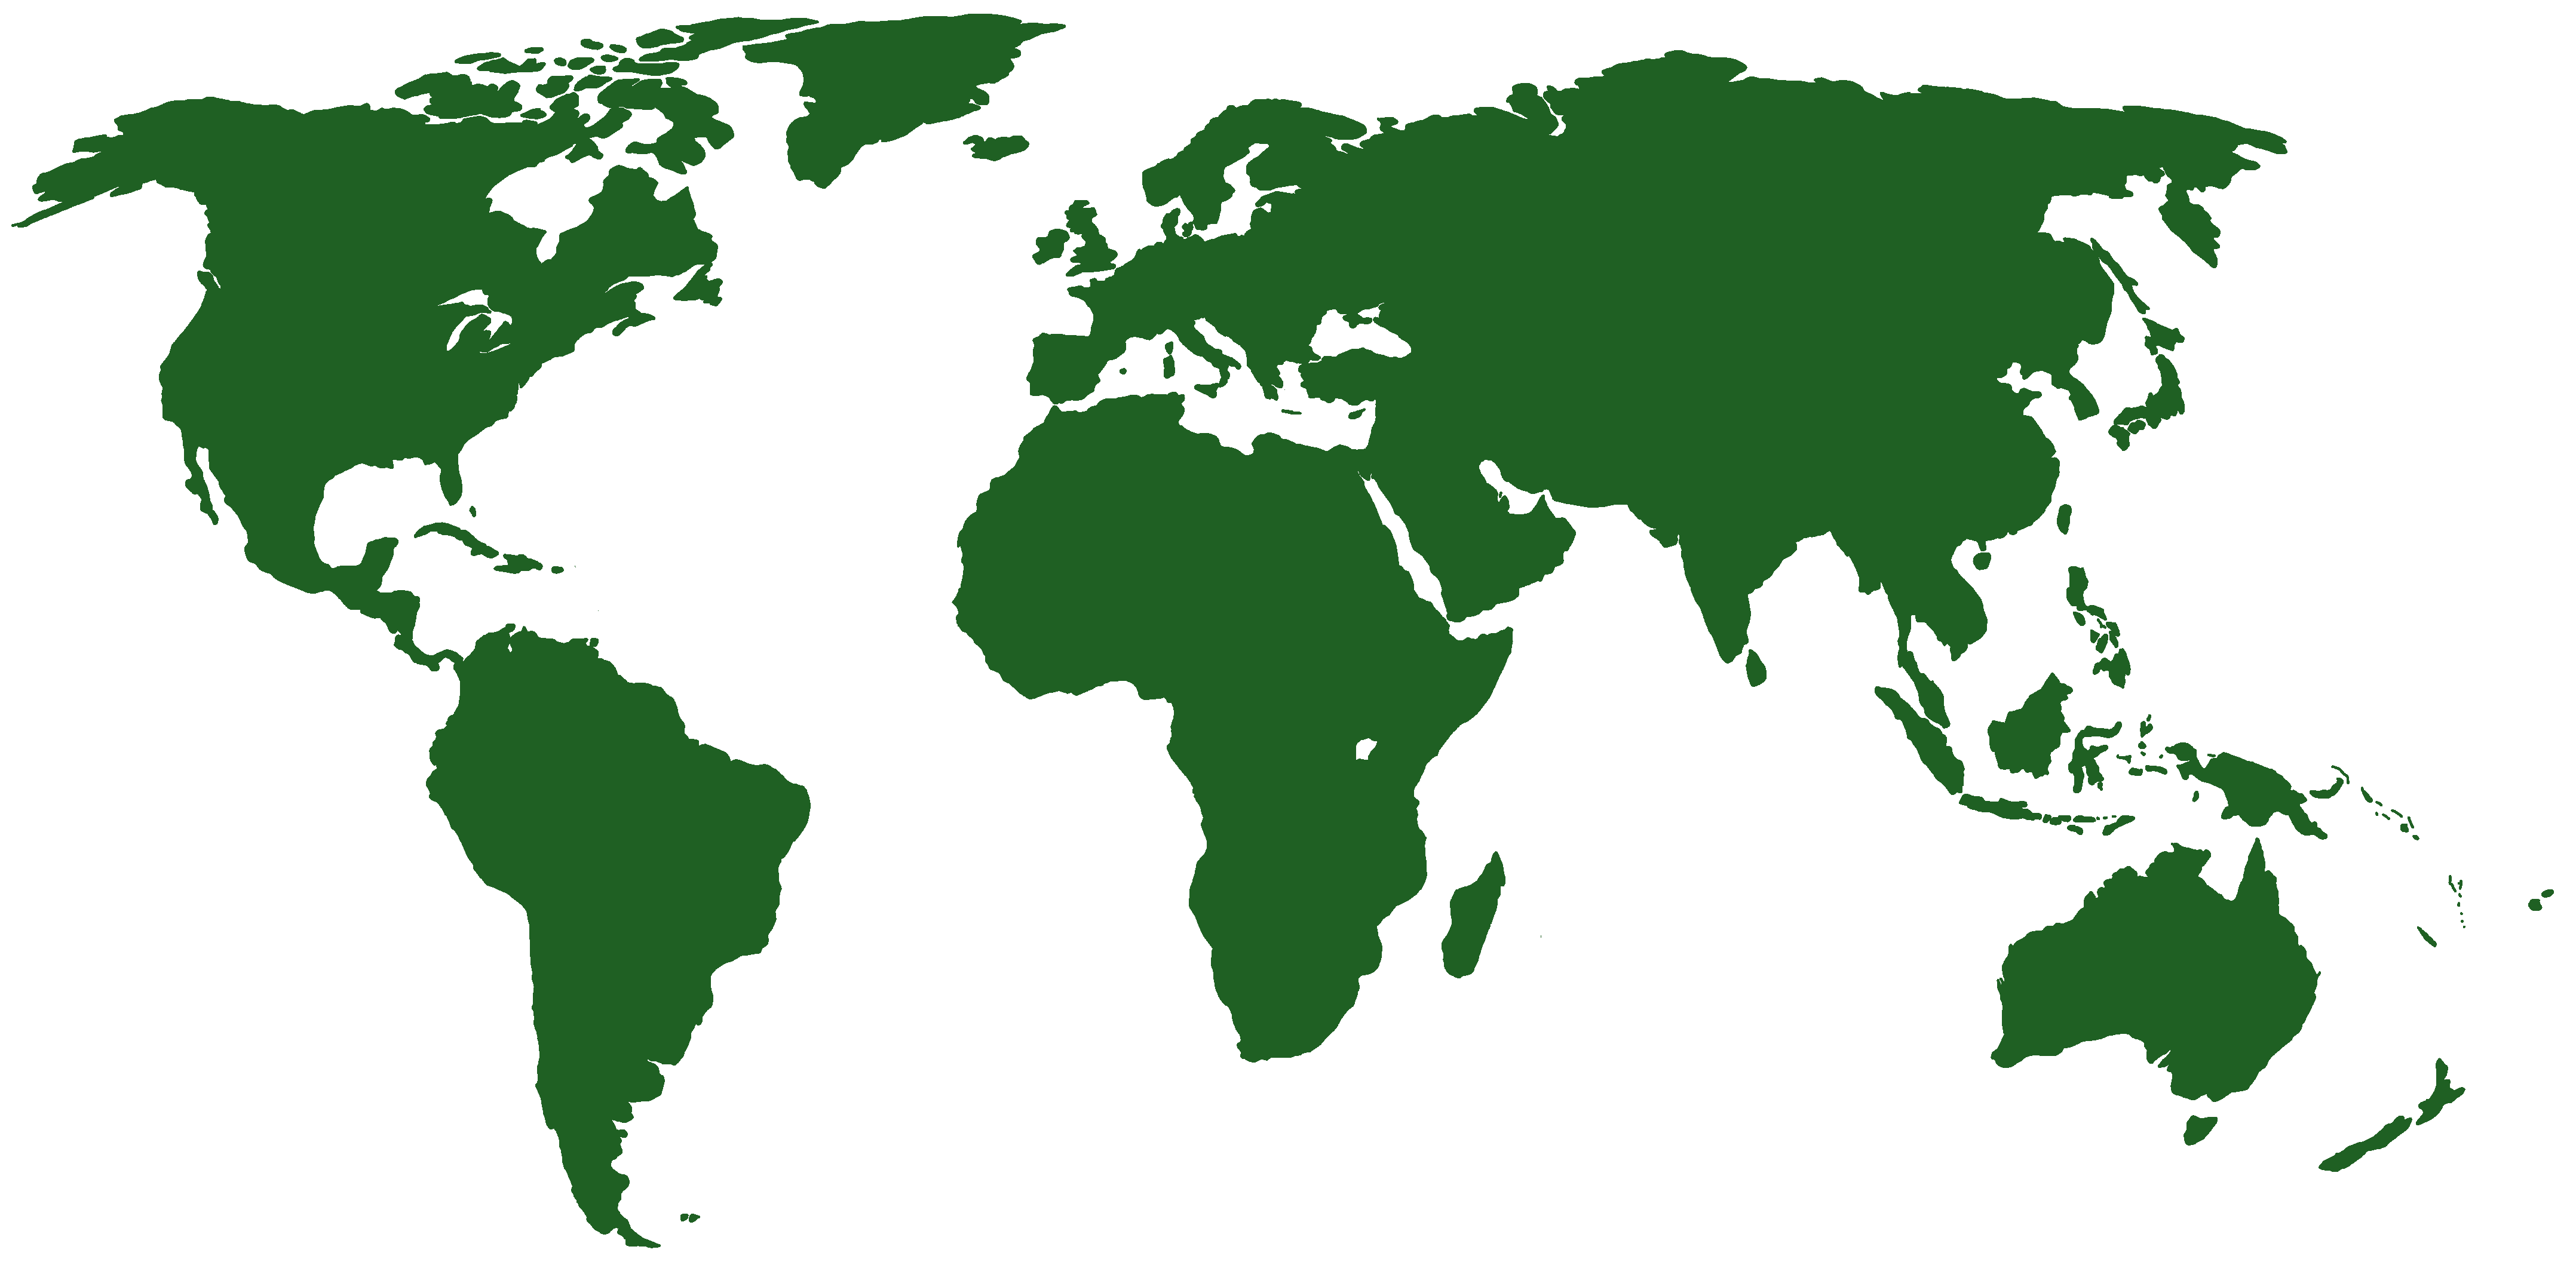 World_map_green.png